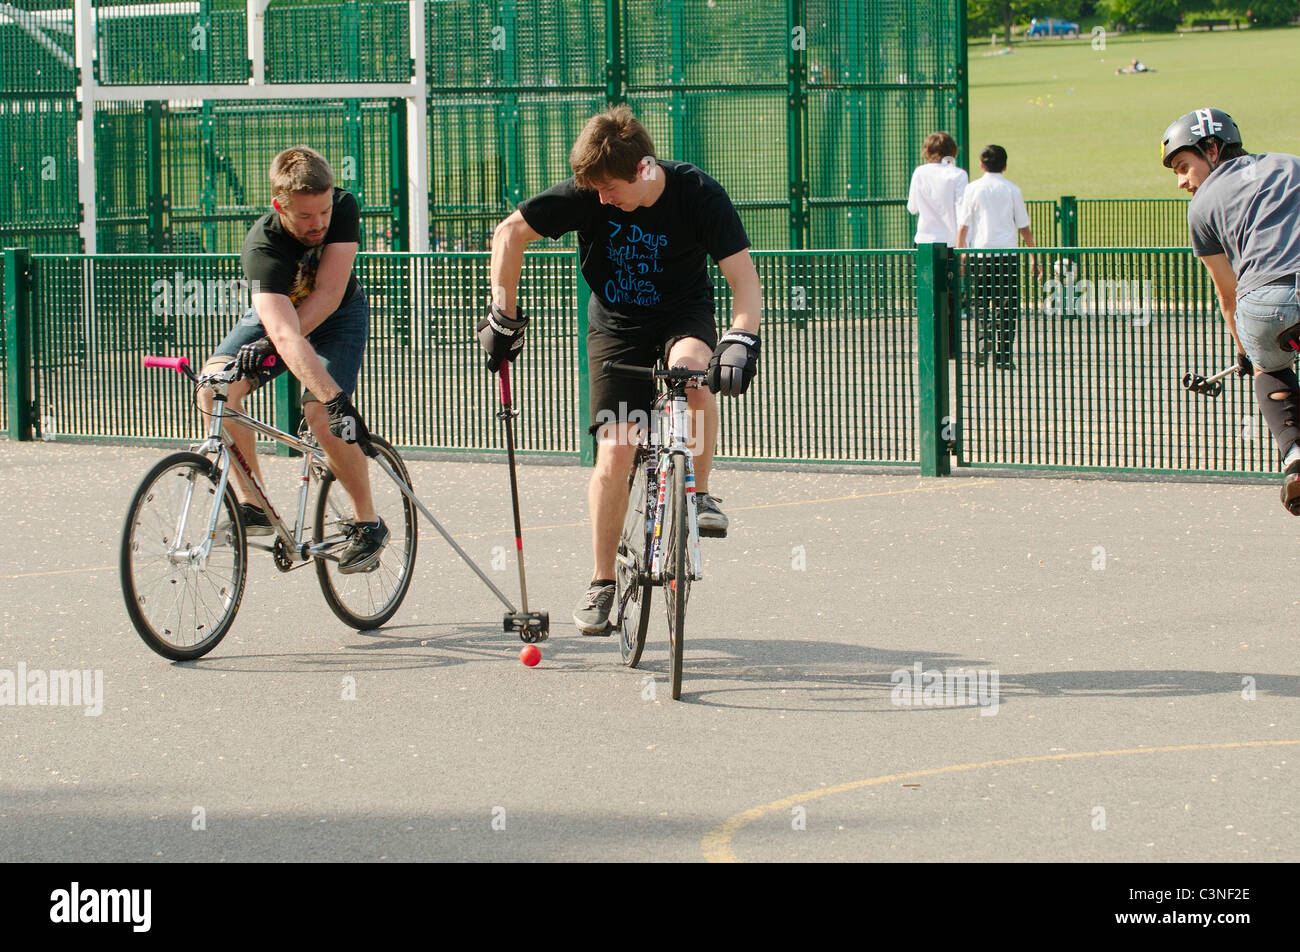 Bicycle Polo in a park in Brighton, England Stock Photo